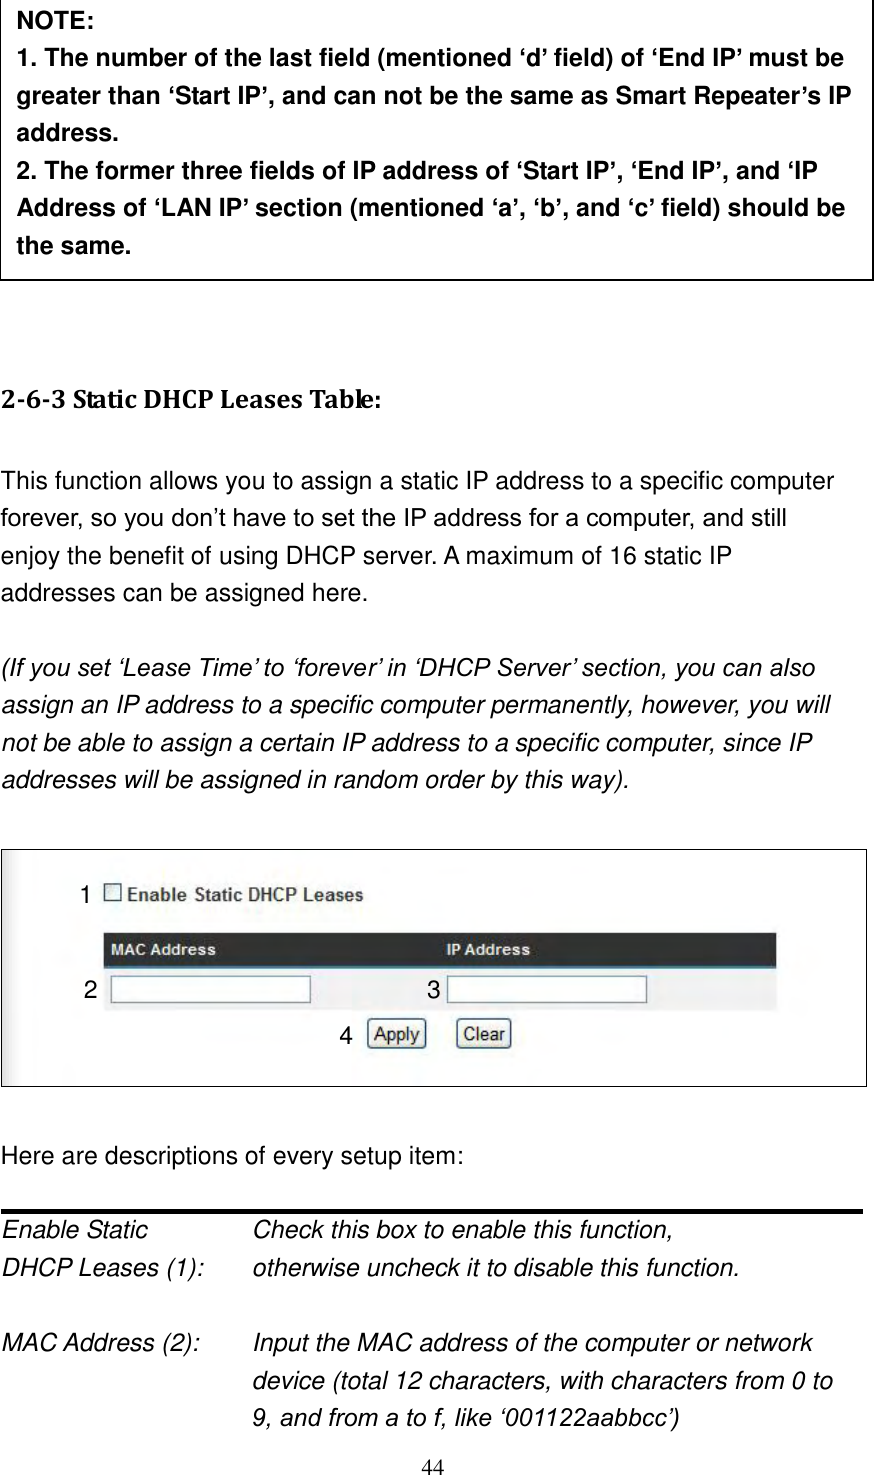 44           2-6-3 Static DHCP Leases Table:  This function allows you to assign a static IP address to a specific computer forever, so you don‟t have to set the IP address for a computer, and still enjoy the benefit of using DHCP server. A maximum of 16 static IP addresses can be assigned here.  (If you set „Lease Time‟ to „forever‟ in „DHCP Server‟ section, you can also assign an IP address to a specific computer permanently, however, you will not be able to assign a certain IP address to a specific computer, since IP addresses will be assigned in random order by this way).      Here are descriptions of every setup item:  Enable Static      Check this box to enable this function, DHCP Leases (1):    otherwise uncheck it to disable this function.  MAC Address (2):    Input the MAC address of the computer or network device (total 12 characters, with characters from 0 to 9, and from a to f, like „001122aabbcc‟)   NOTE:   1. The number of the last field (mentioned ‘d’ field) of ‘End IP’ must be greater than ‘Start IP’, and can not be the same as Smart Repeater’s IP address. 2. The former three fields of IP address of ‘Start IP’, ‘End IP’, and ‘IP Address of ‘LAN IP’ section (mentioned ‘a’, ‘b’, and ‘c’ field) should be the same. 3. These settings will affect wireless clients too. 1 2 3 4 